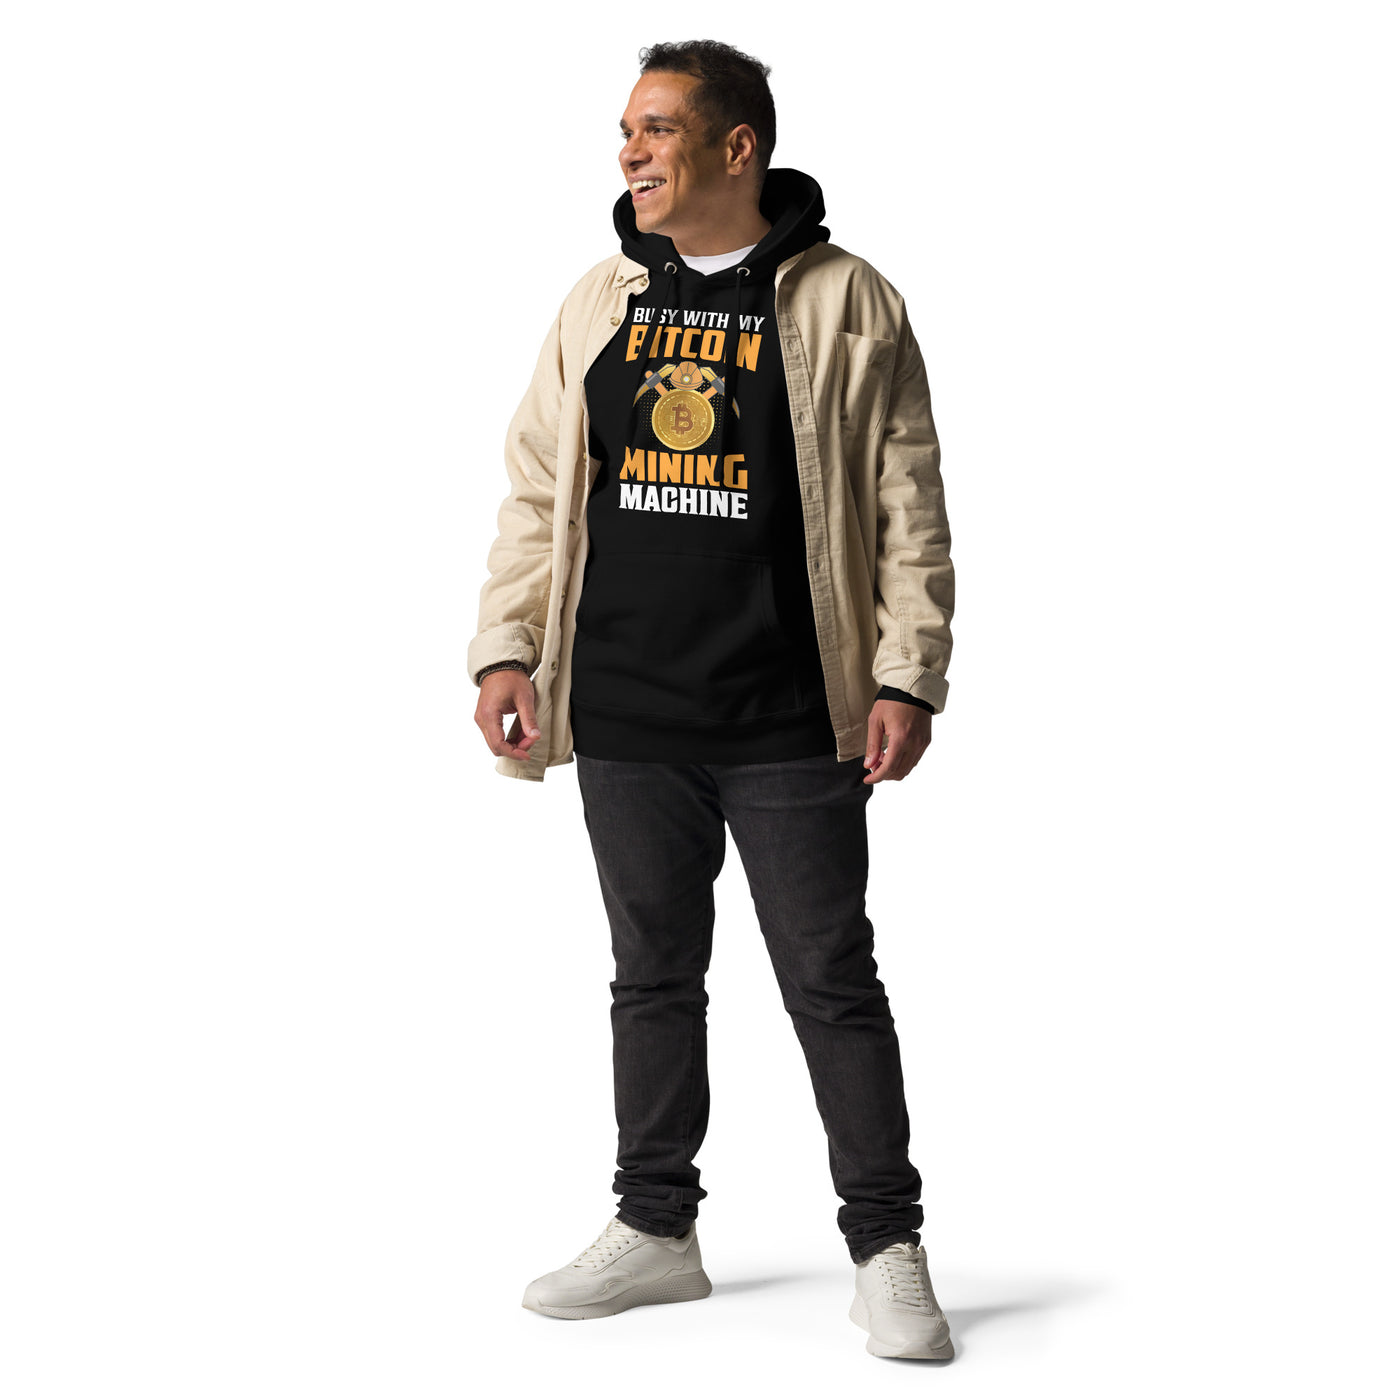 Busy with my Bitcoin Mining Machine Unisex Hoodie